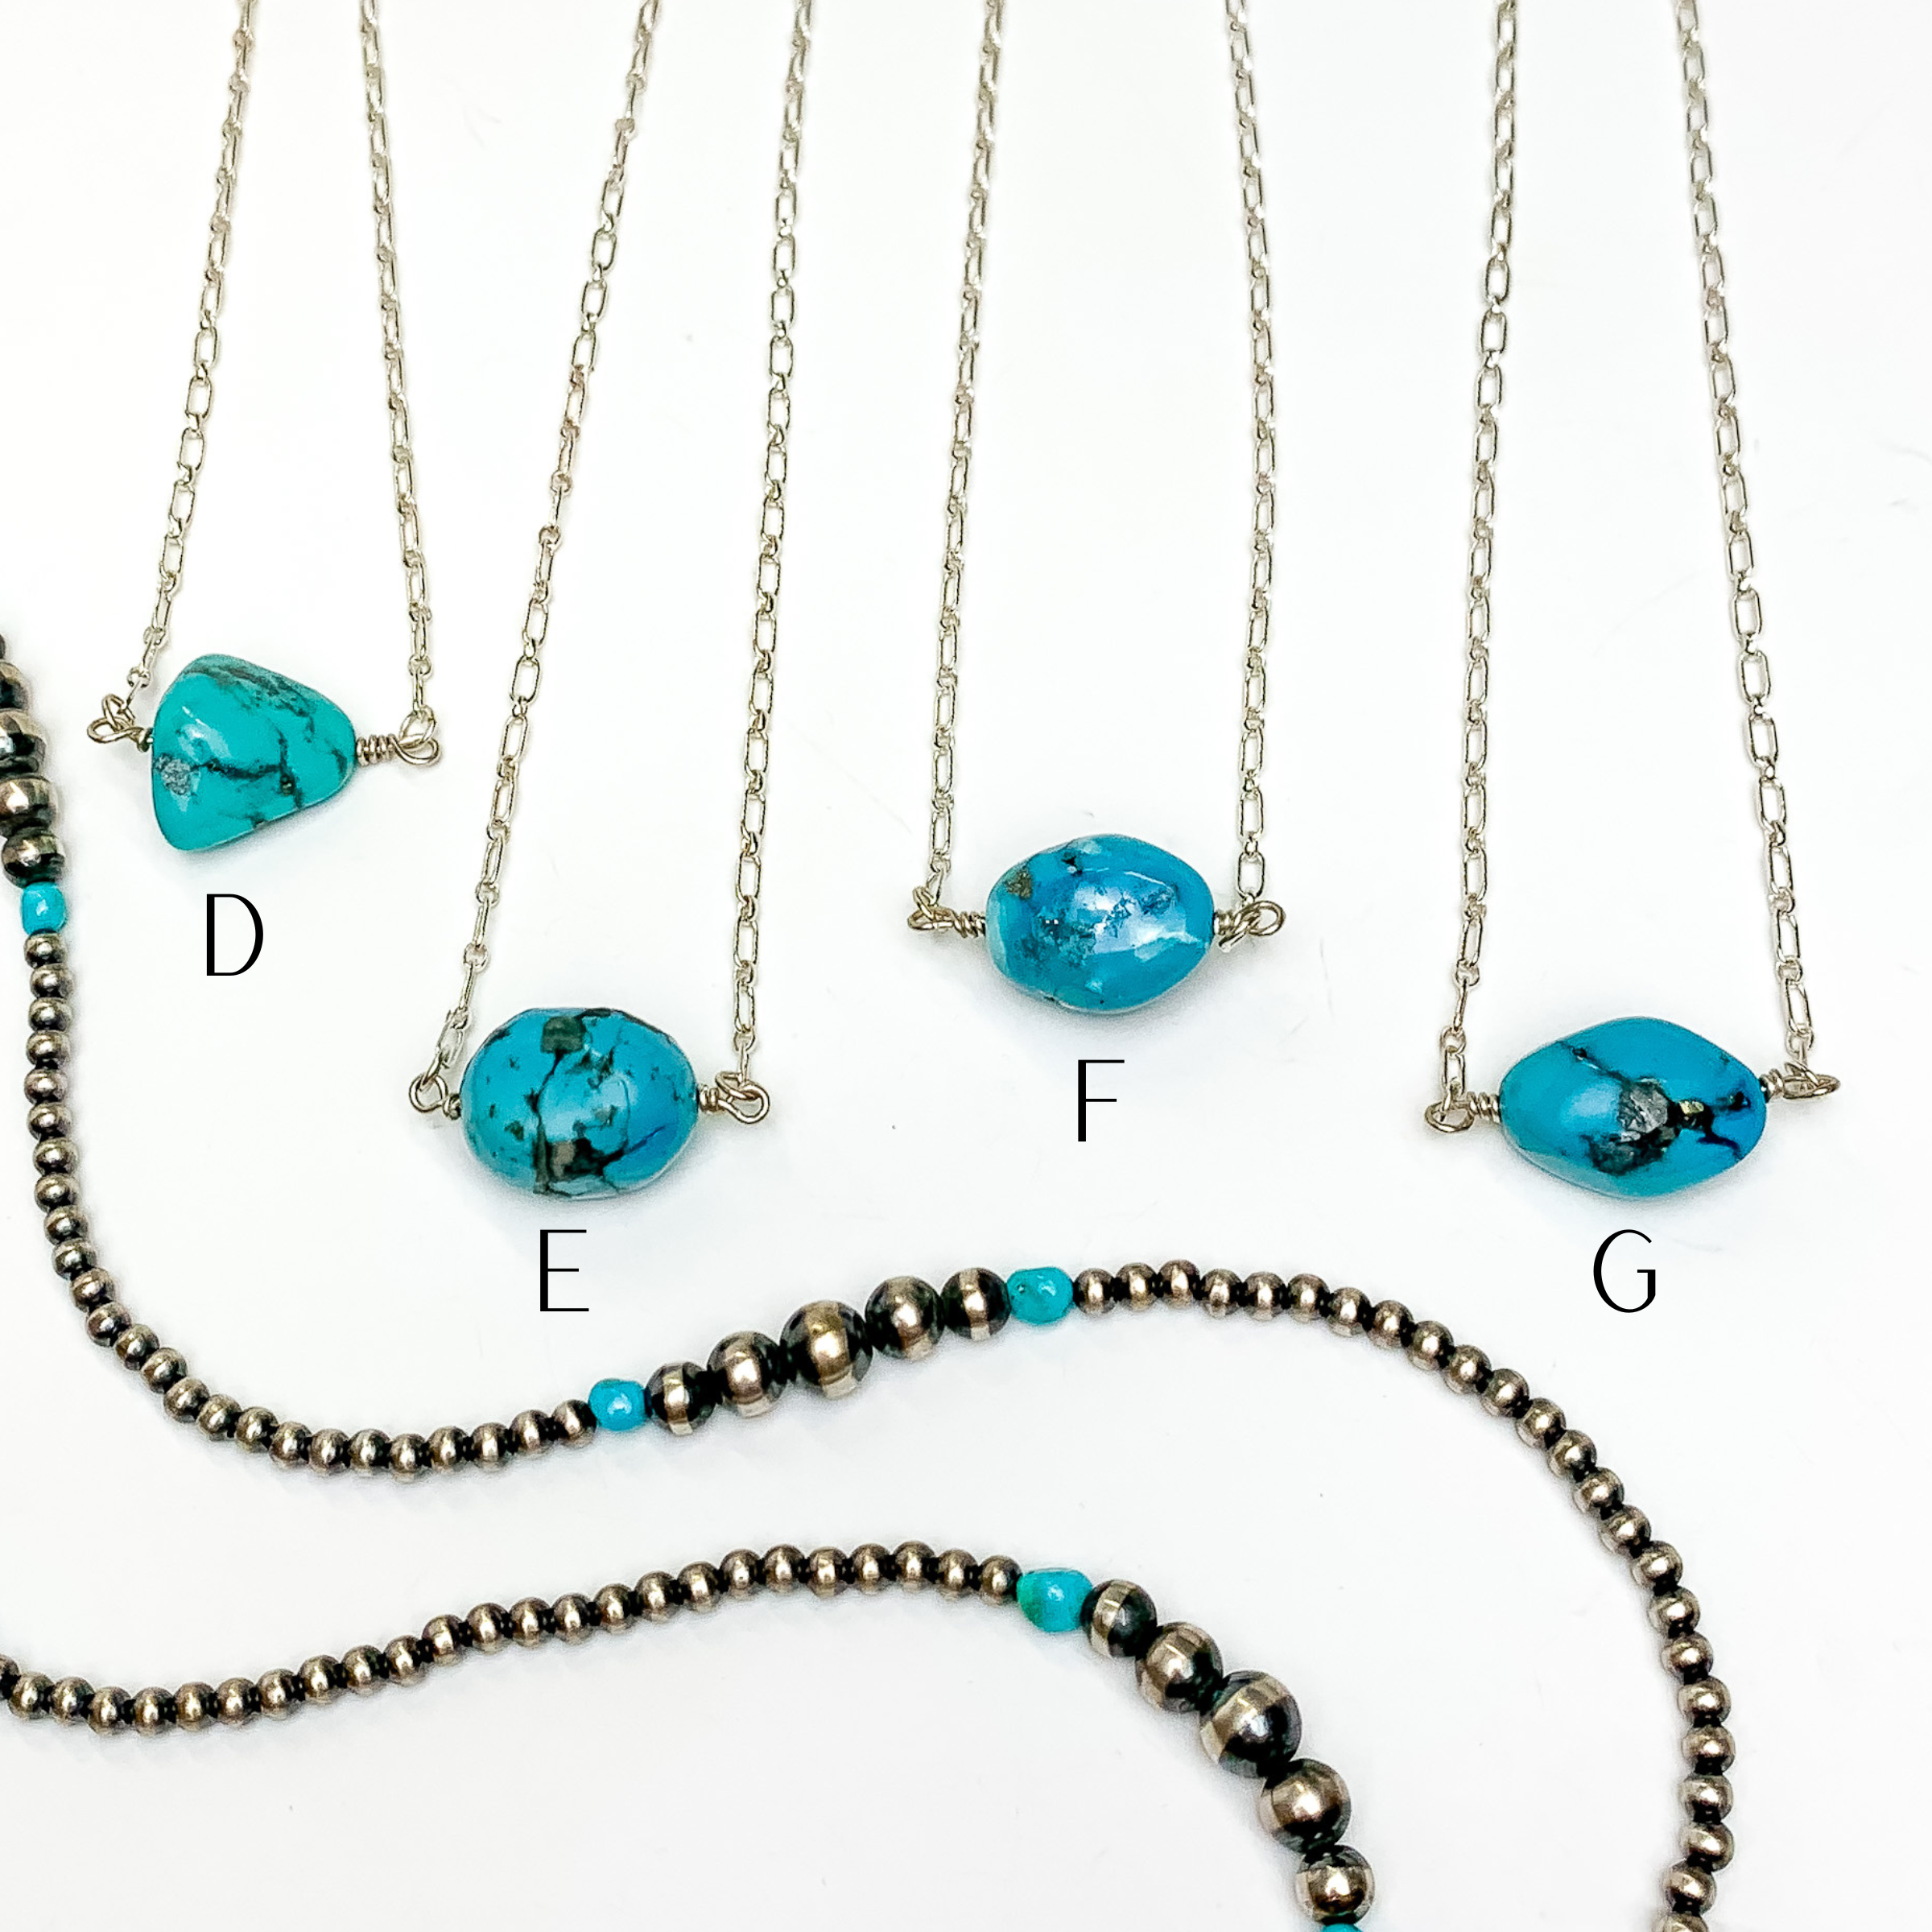 Navajo | Navajo Handmade Small Turquoise Chunk Stone on Silver Chain Necklace - Giddy Up Glamour Boutique